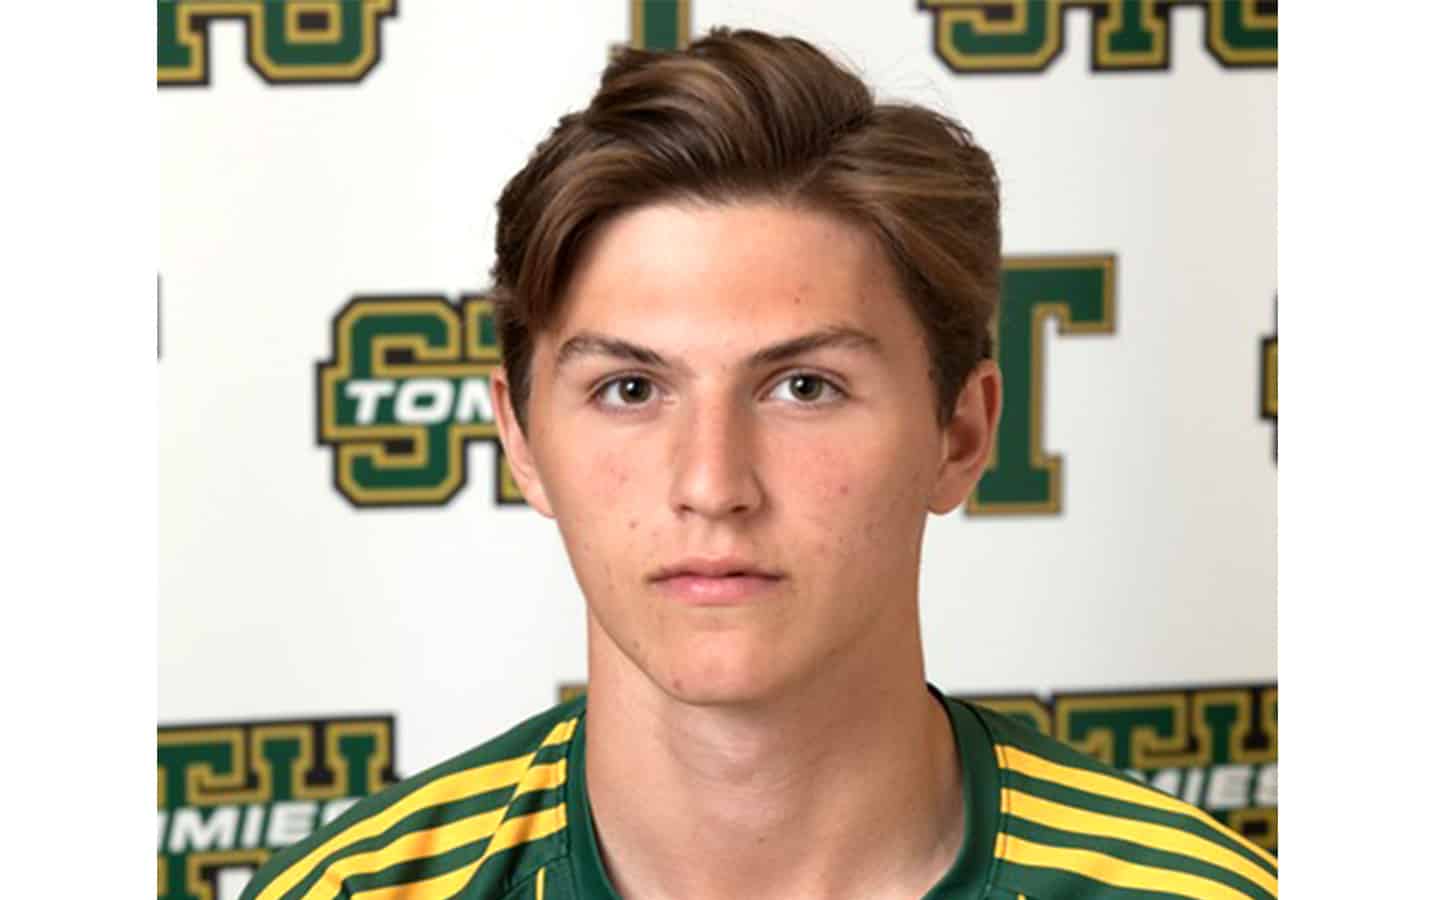 Former Wolfpack soccer player earning accolades as part of St. Thomas University team